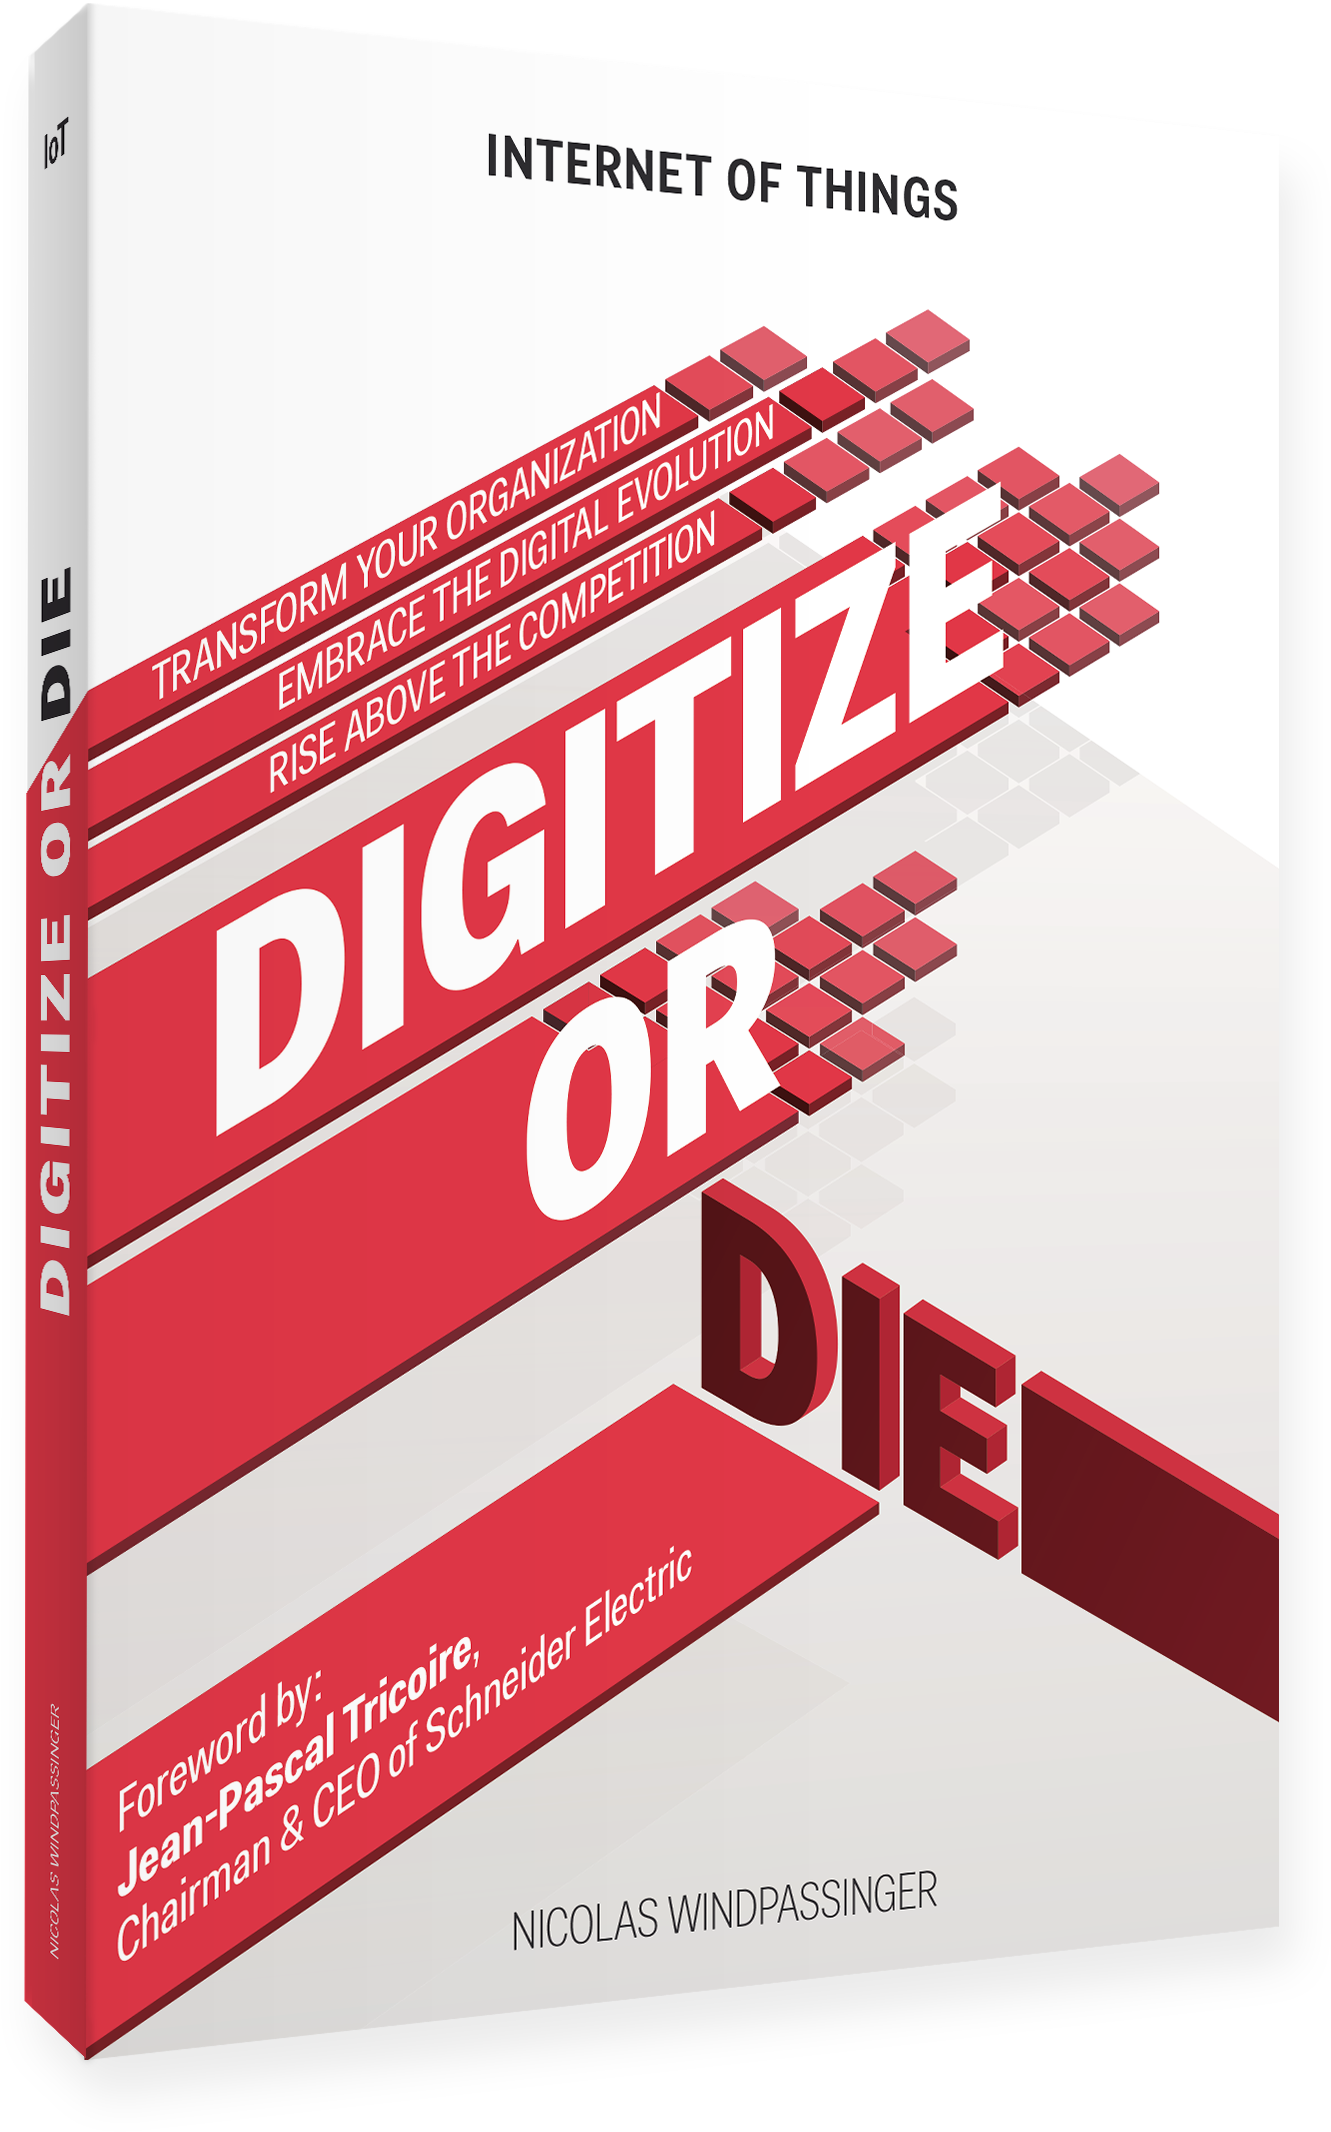 Digitize Or Die Transform Your Organization And Rise - Internet Of Things (1900x2300)